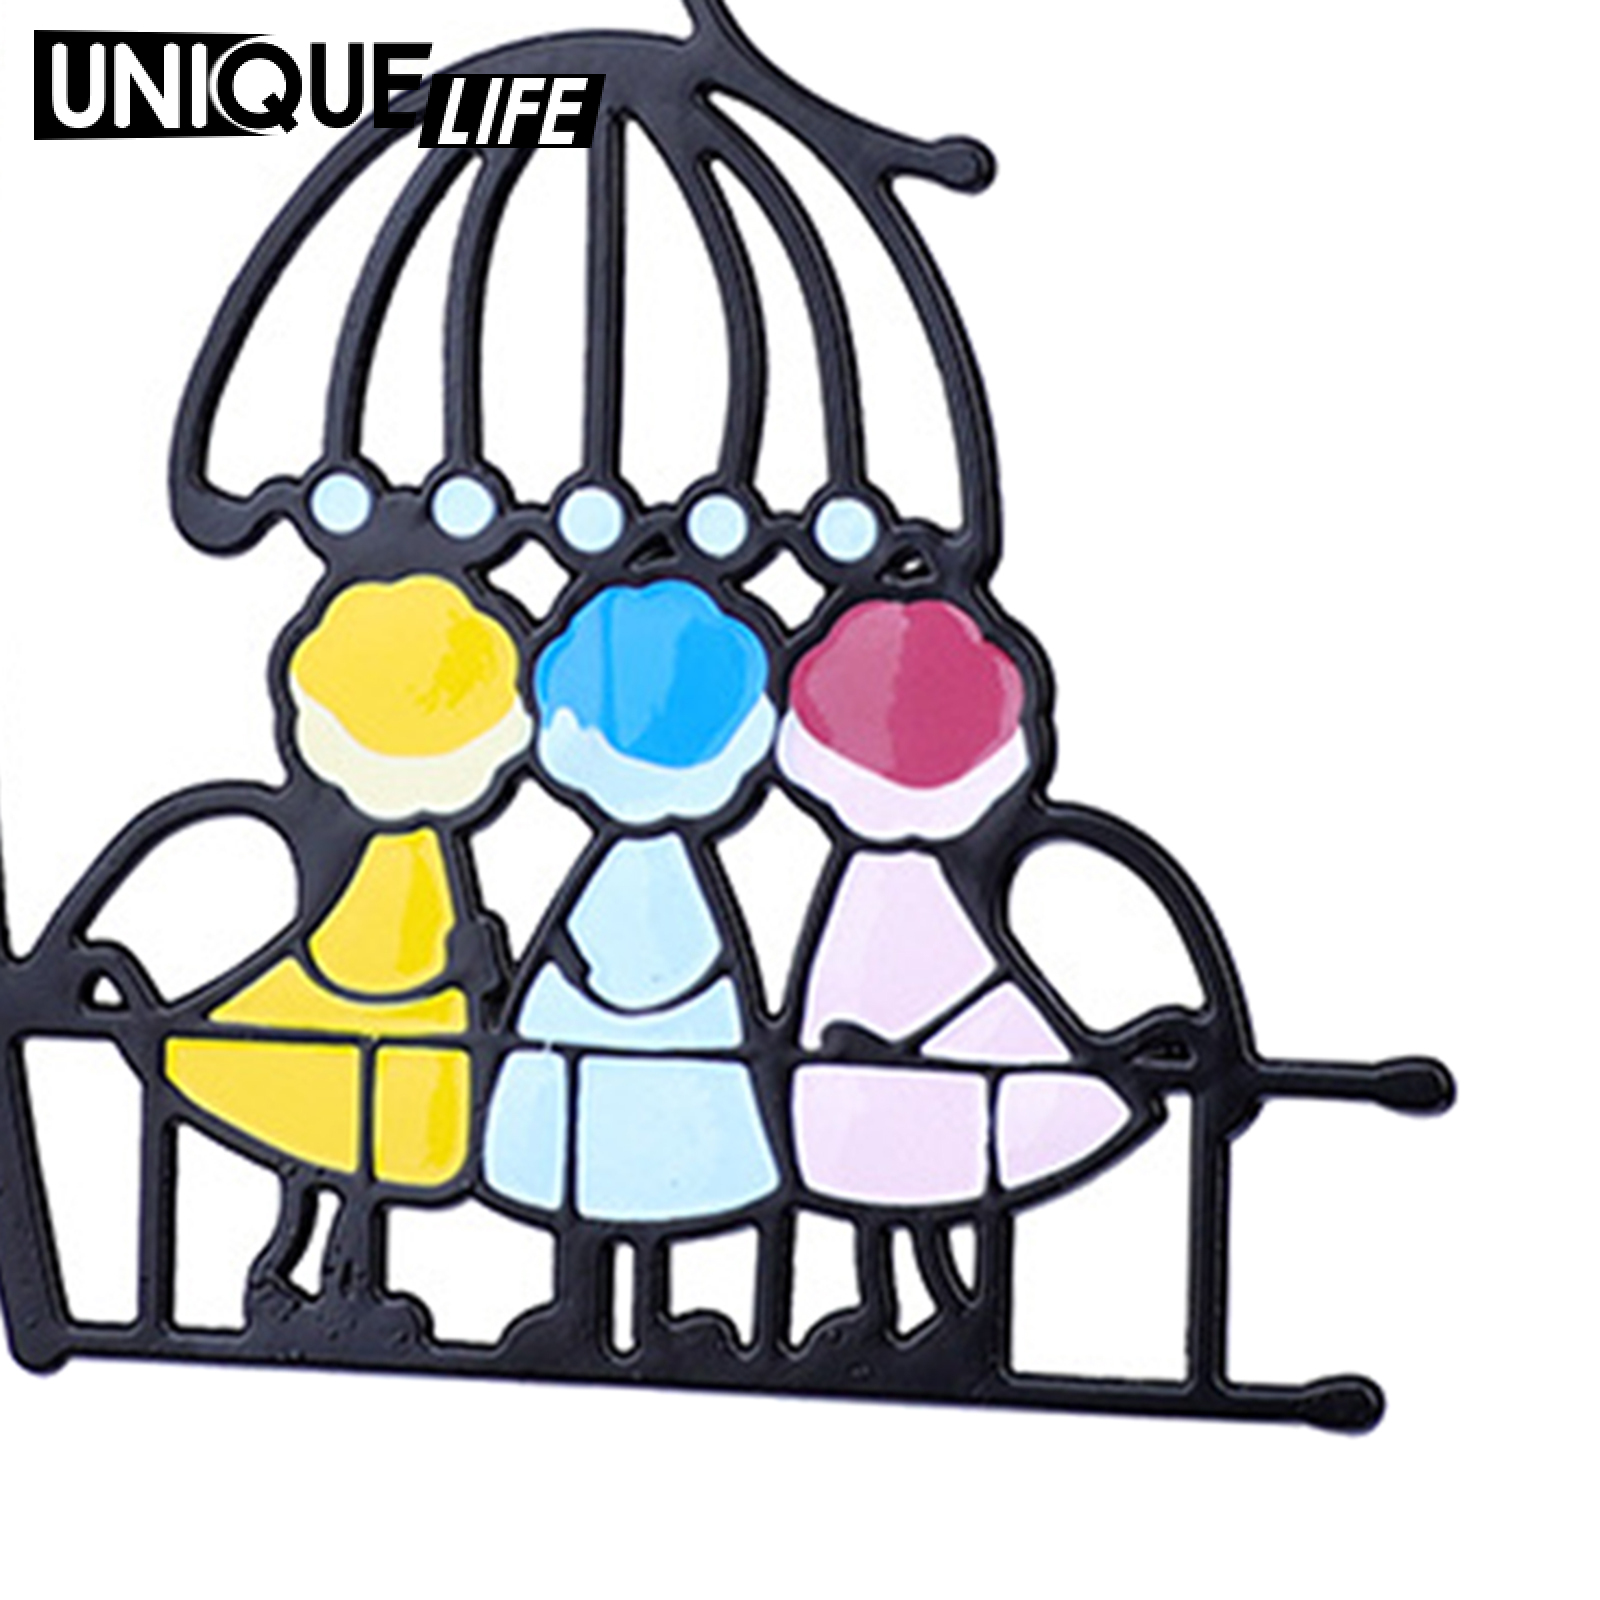 [Unique Life]Stained Glass Sun Catcher A Lovely Gift for Your Family, Full of love Pattern Design